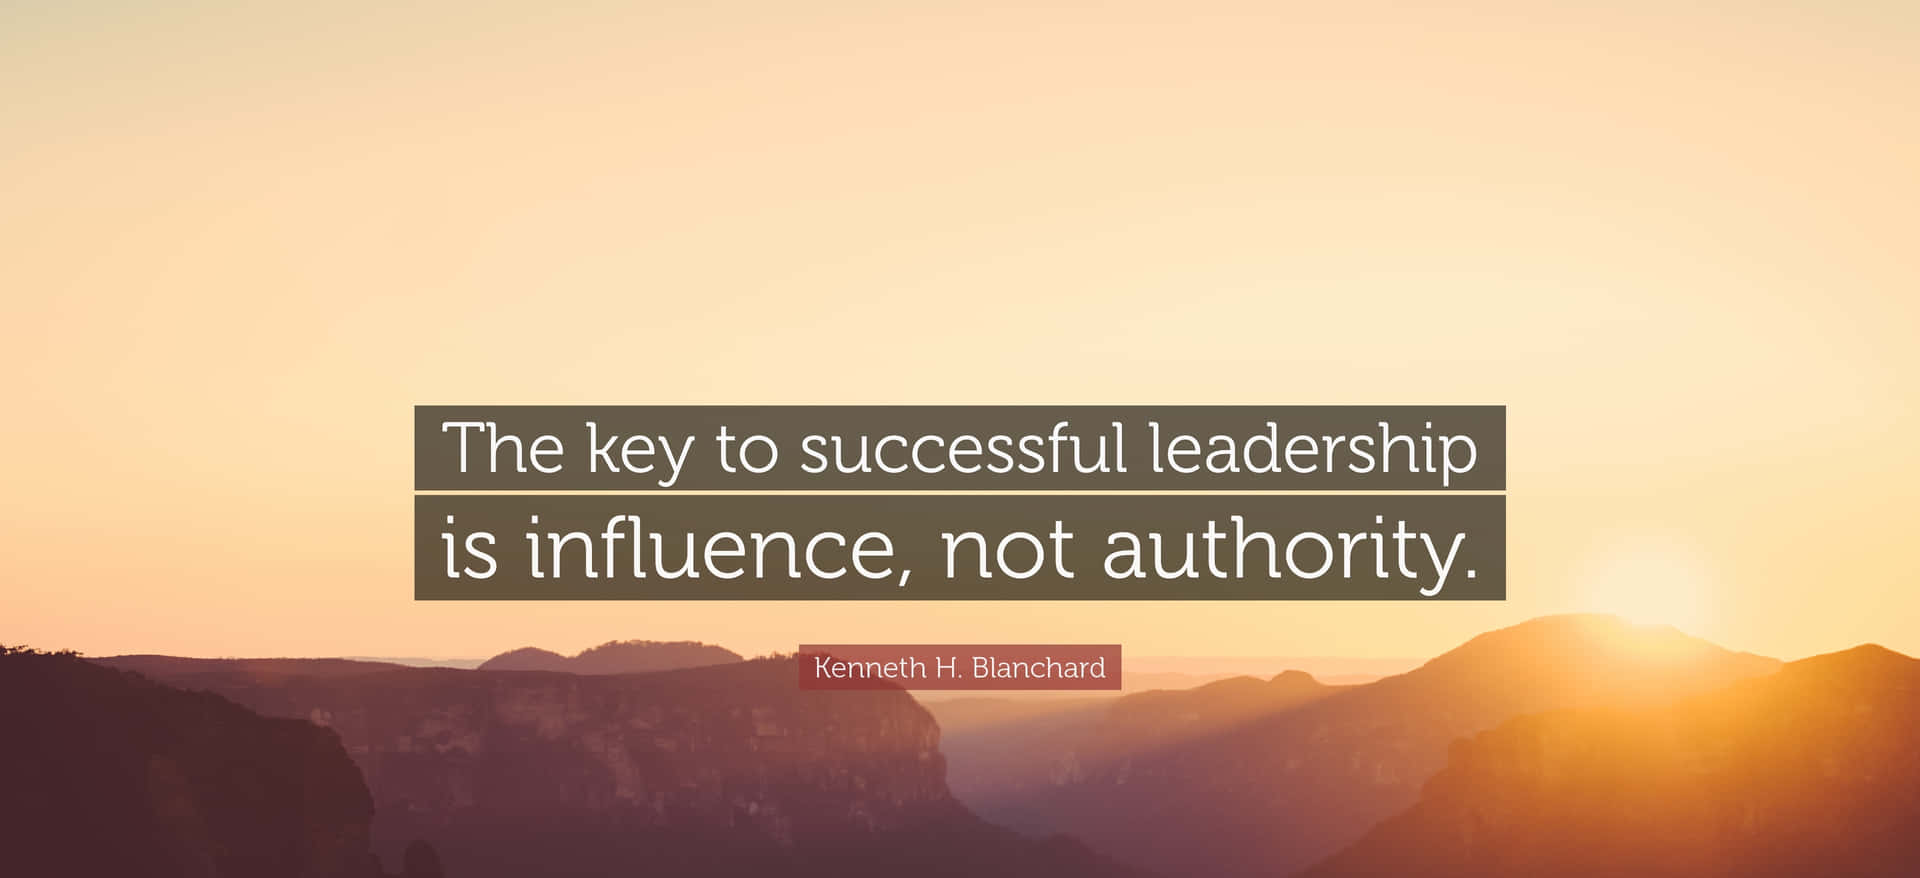 Influence Not Authority Leadership Quote Wallpaper